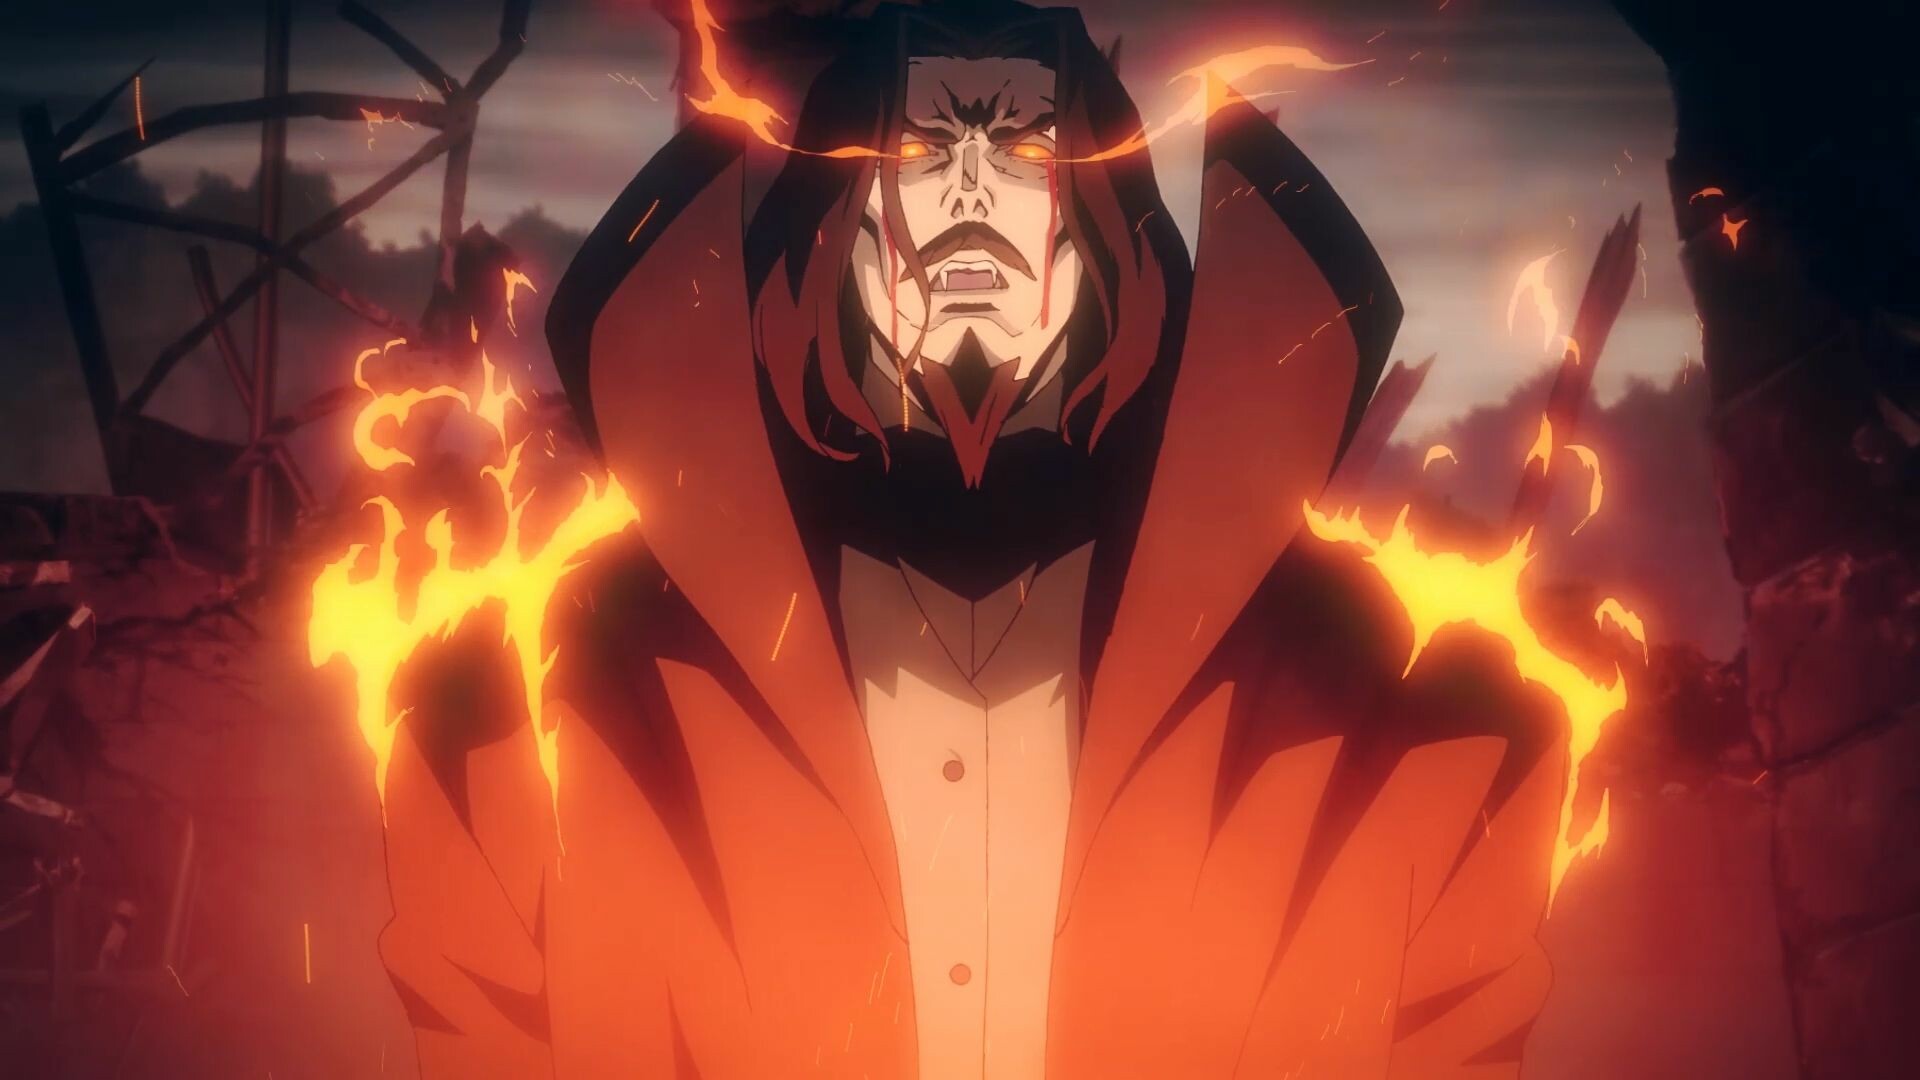 Castlevania (Netflix): Dracula, A vampire and a sorcerer, The main antagonist of the series and the final boss of almost every installment. 1920x1080 Full HD Wallpaper.